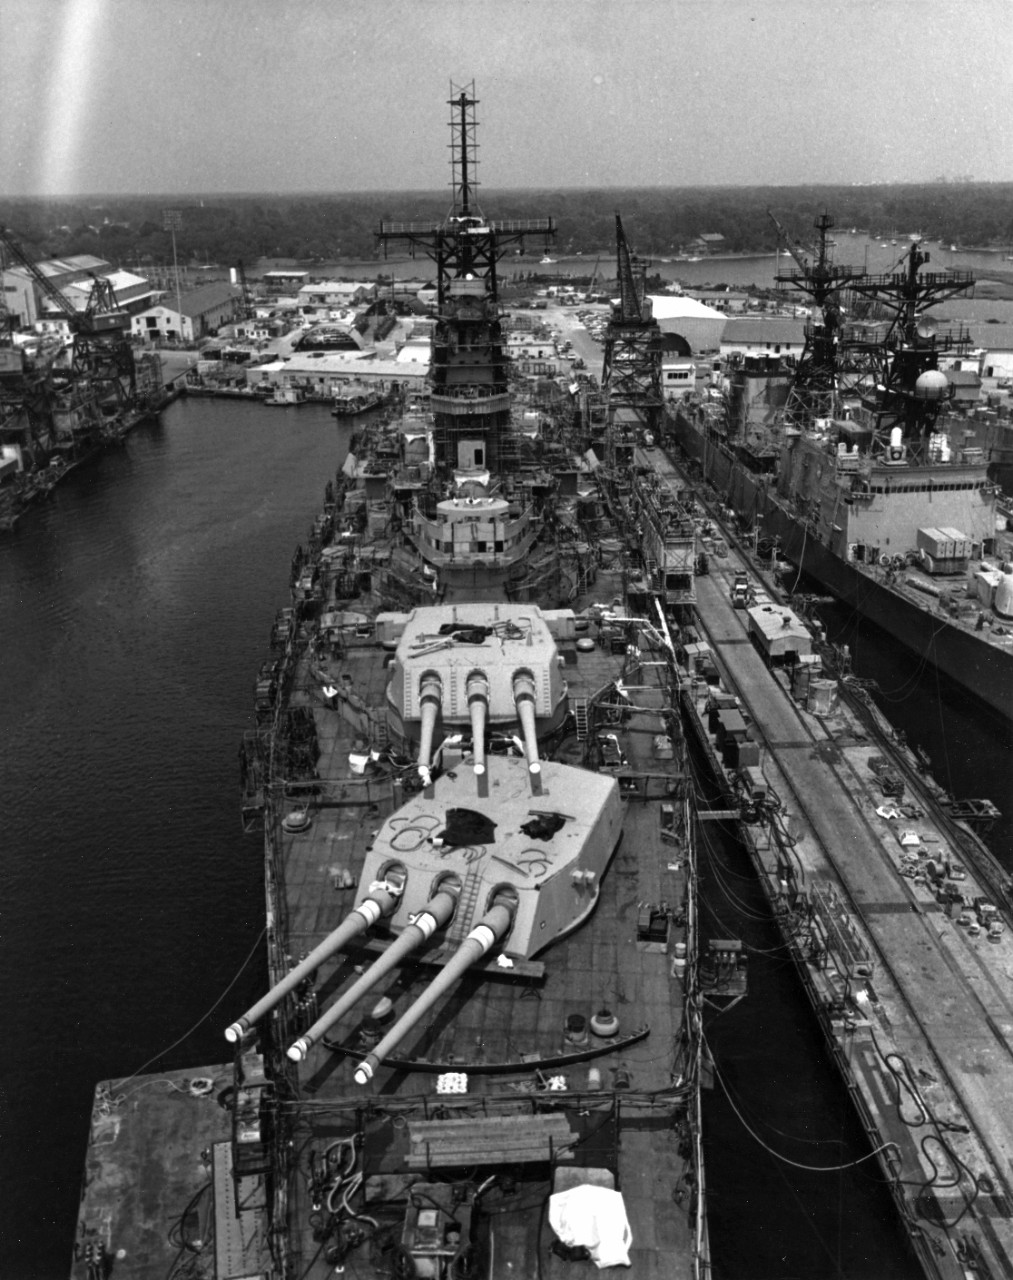 High angle view of the battleship Iowa (BB-61) in port at Pascagoula, Mississippi, for conversion and repair prior to being recommissioned.